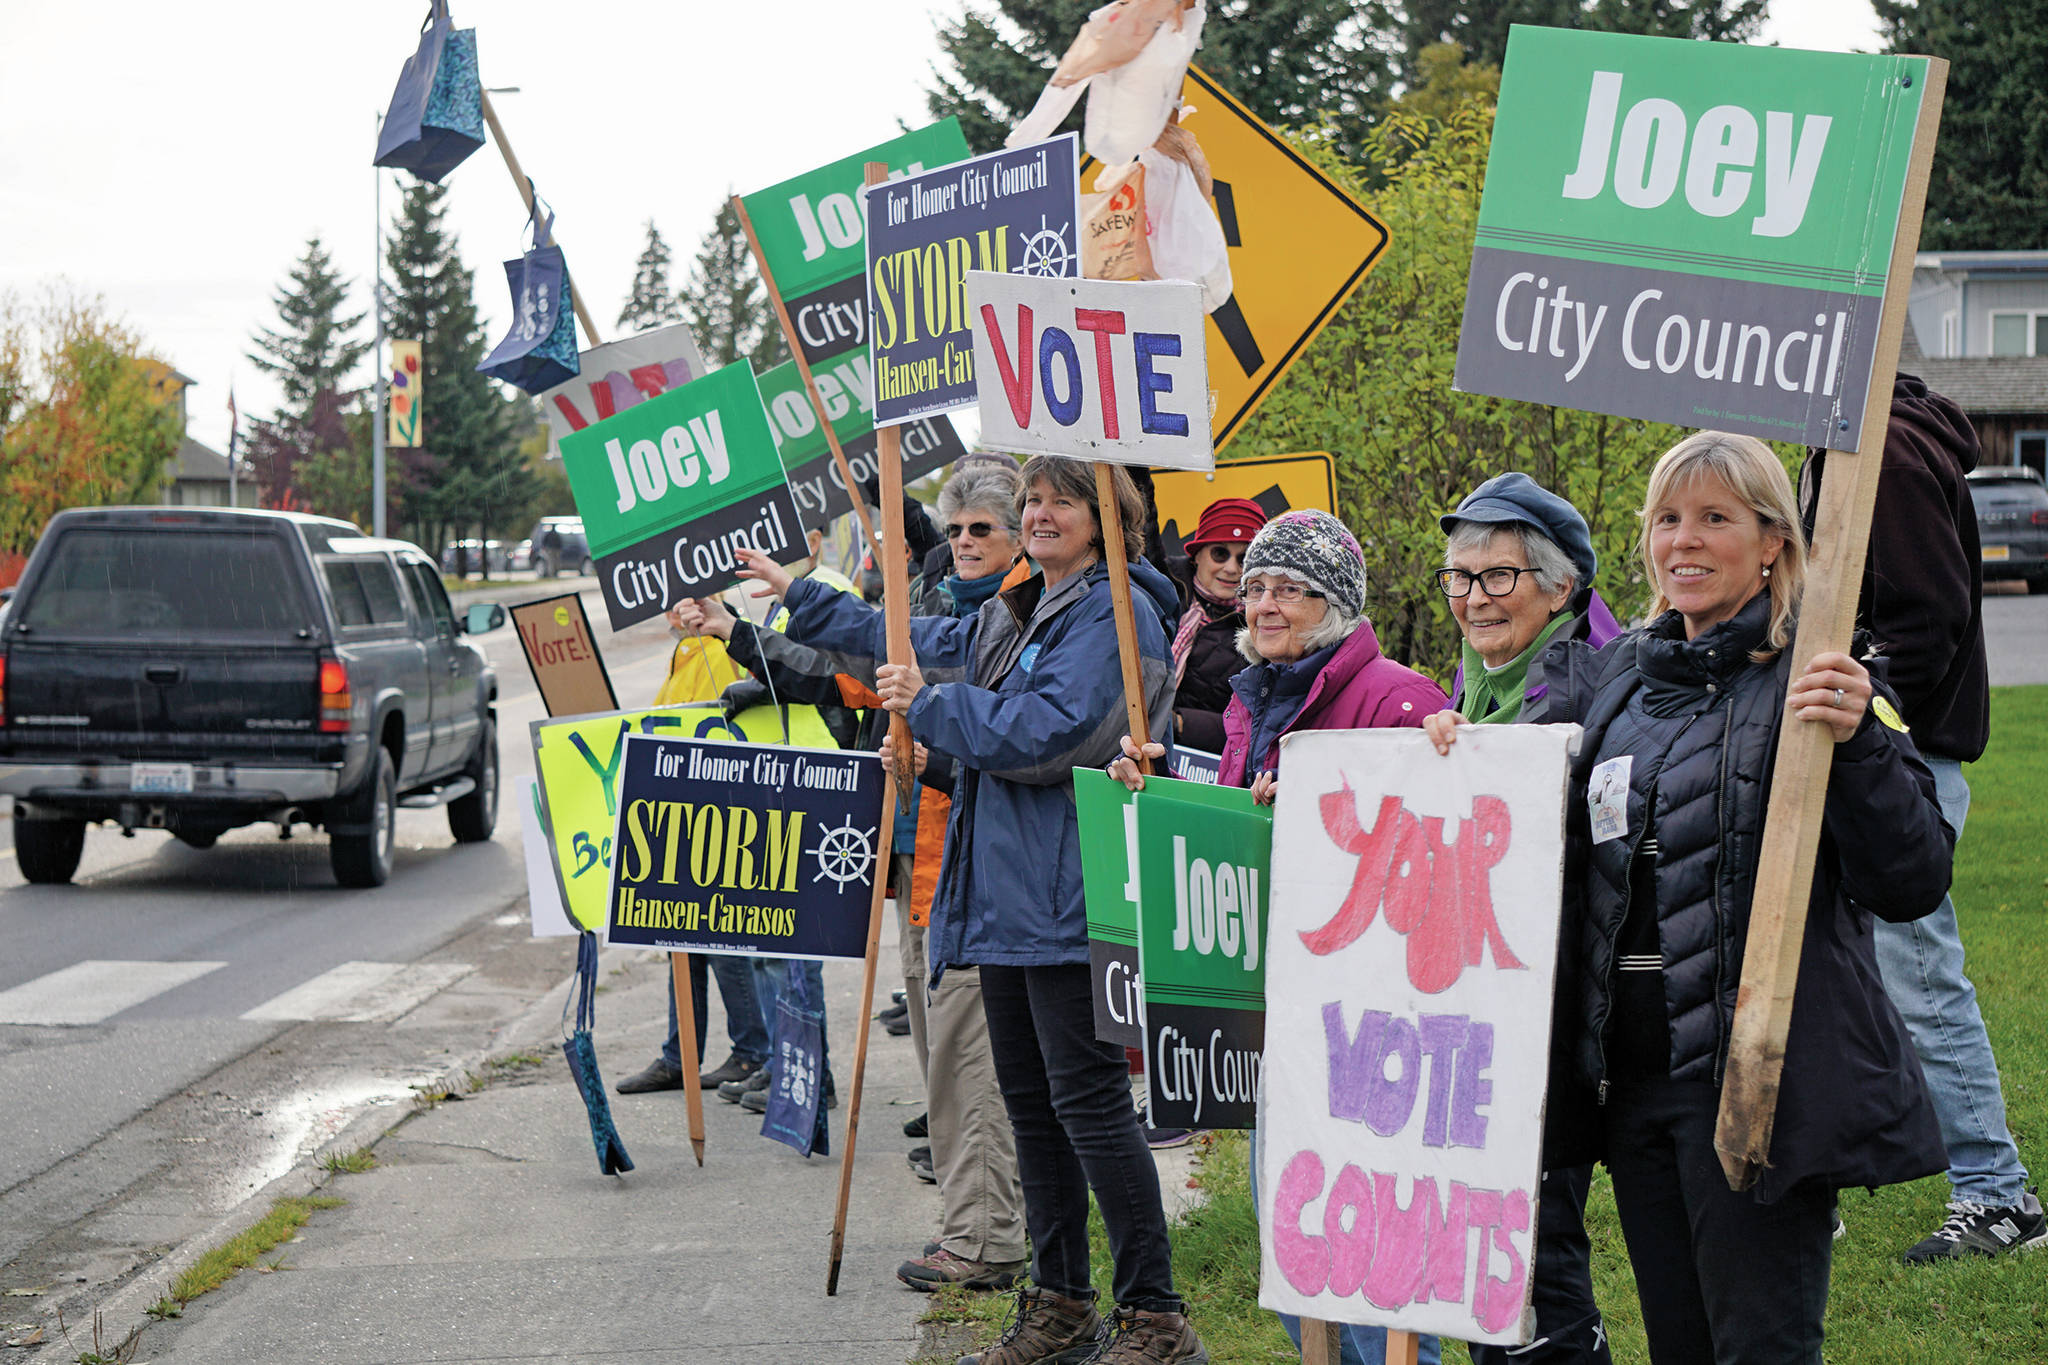 Supporters wave signs in support of Proposition A, to ban single-use plastic bags, and for Homer City Council candidates Joey Evensen and Storm Hansen-Cavasos on Tuesday, Oct. 1, 2019, and WKFL Park in Homer, Alaska. (Photo by Michael Armstrong/Homer News)